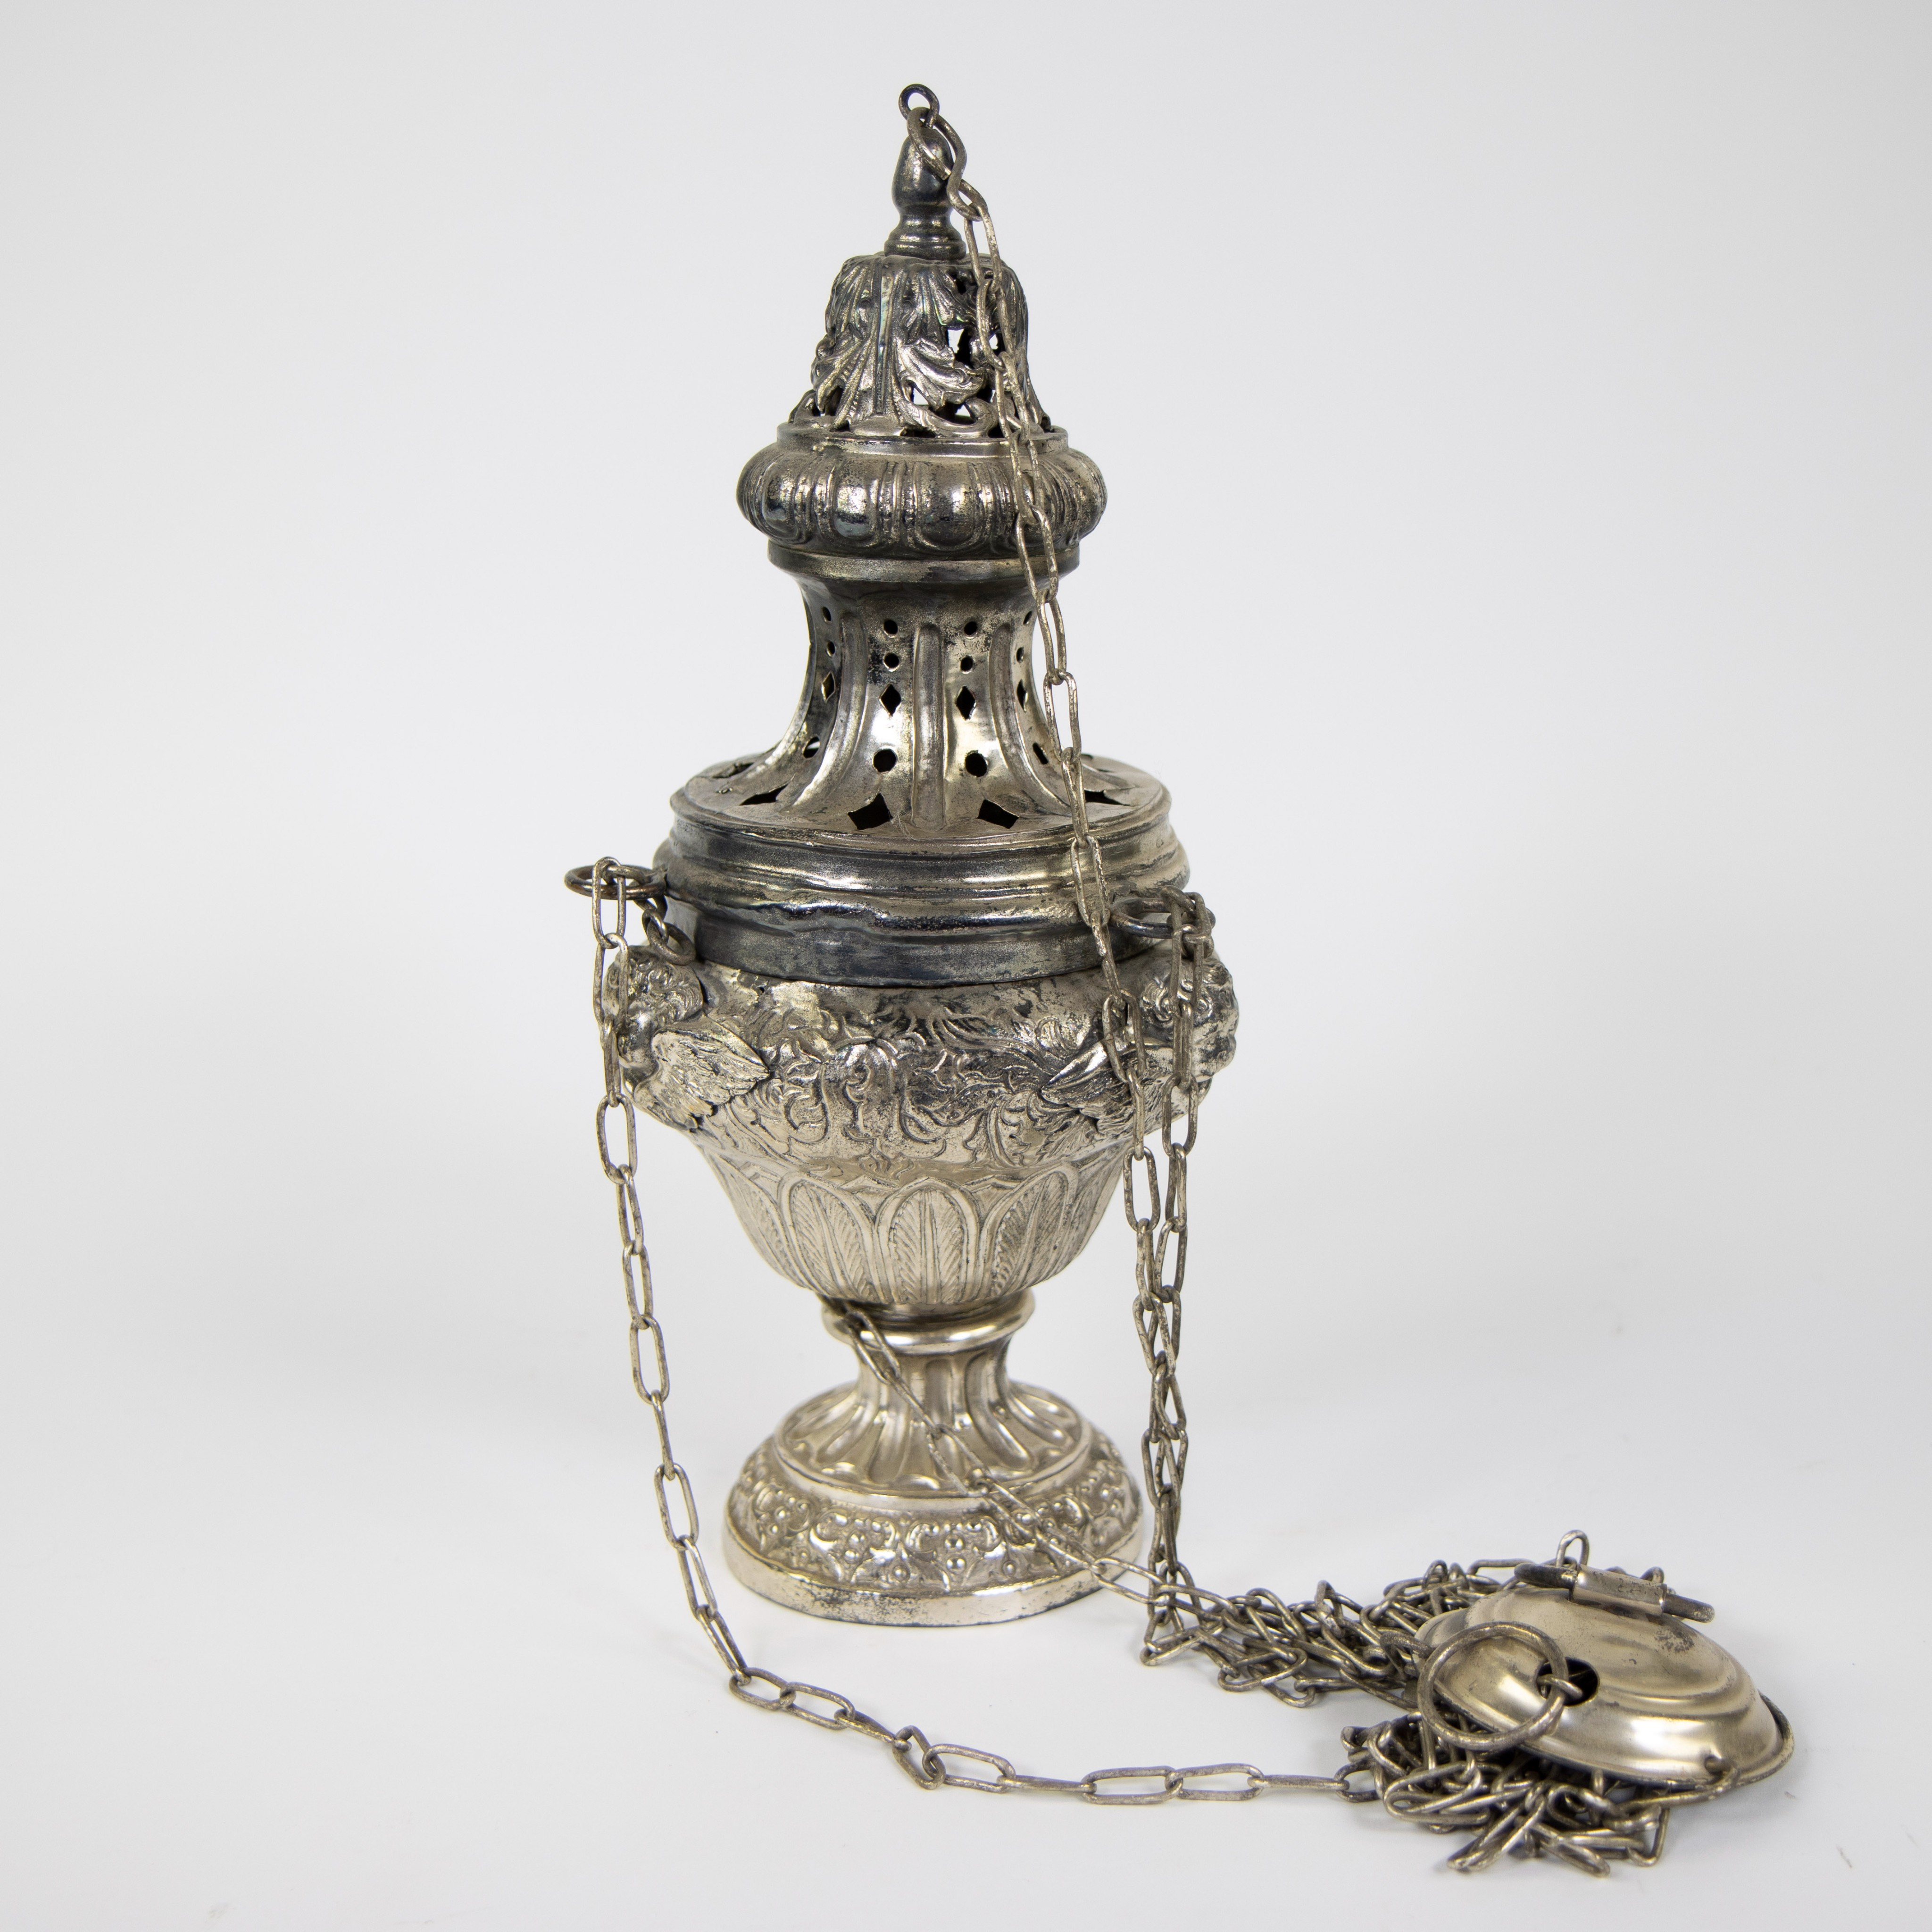 Silver plated incense burner finely embossed with leaf motifs, 19th century - Image 2 of 4